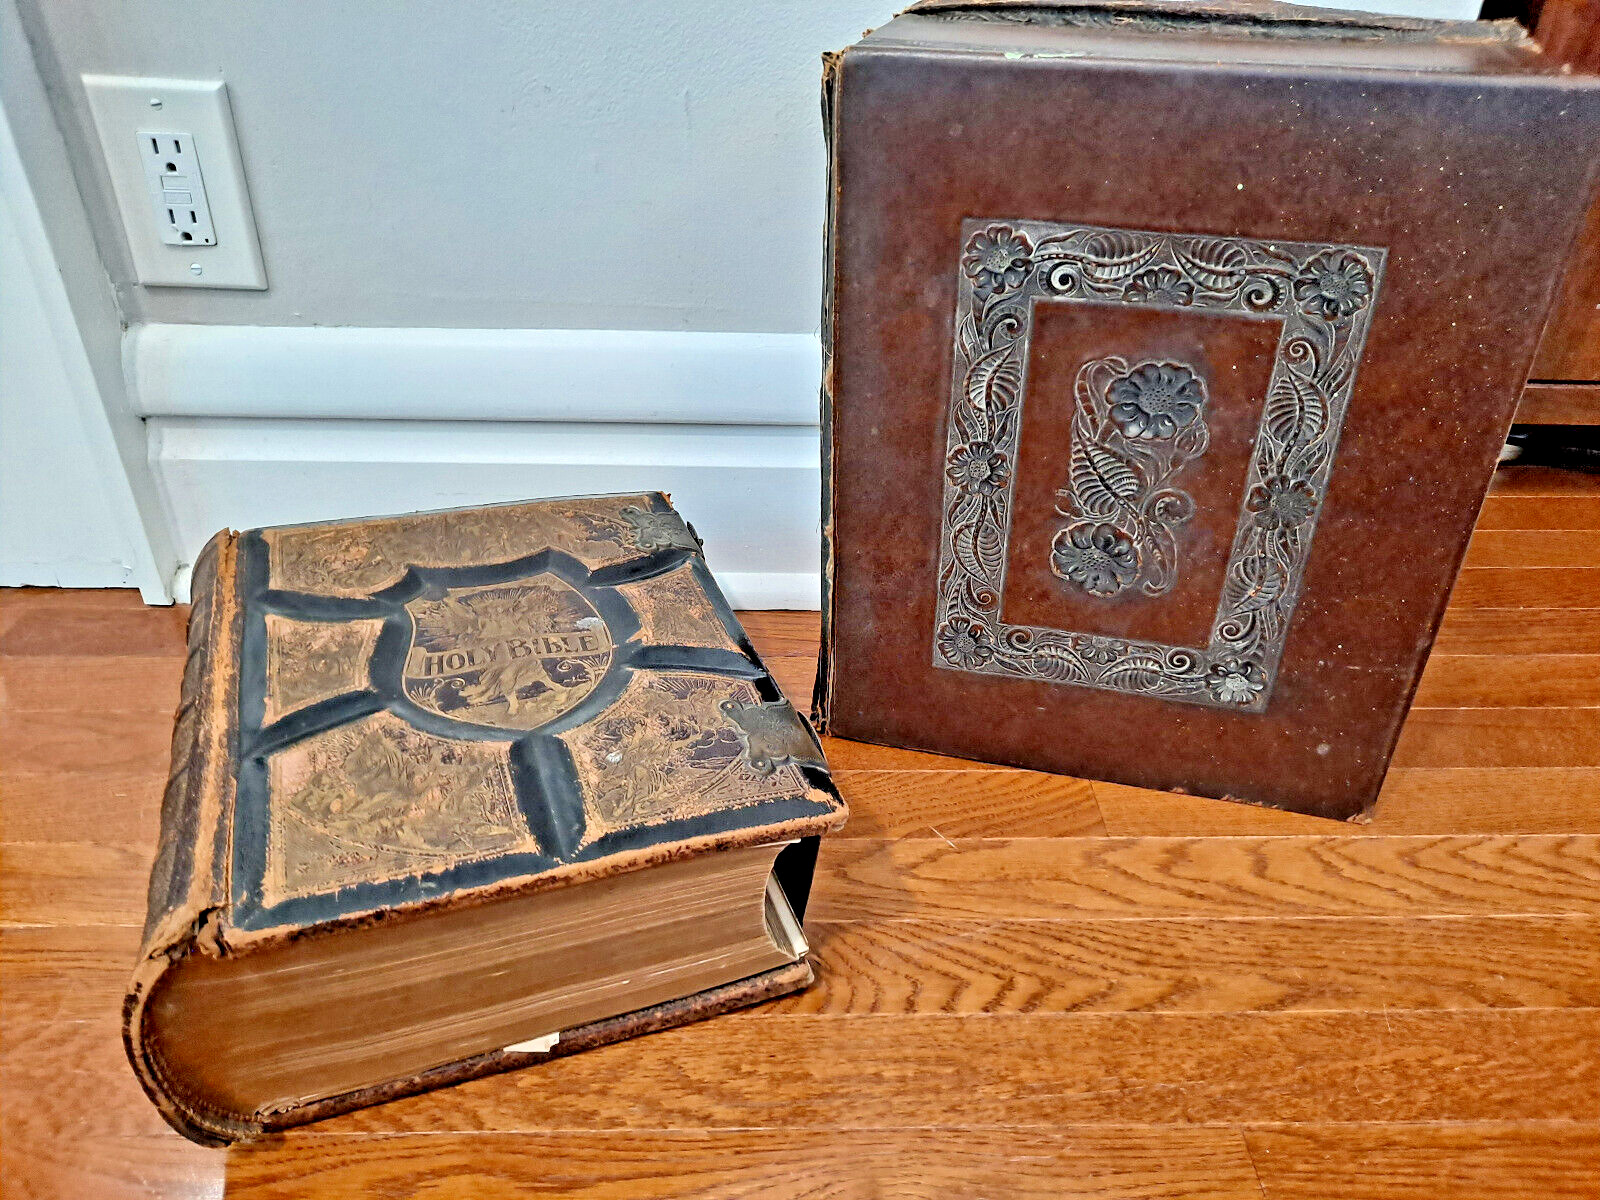 Antique 1895 Pictorial Family Holy Bible English Combination Edition NEED REPAIR